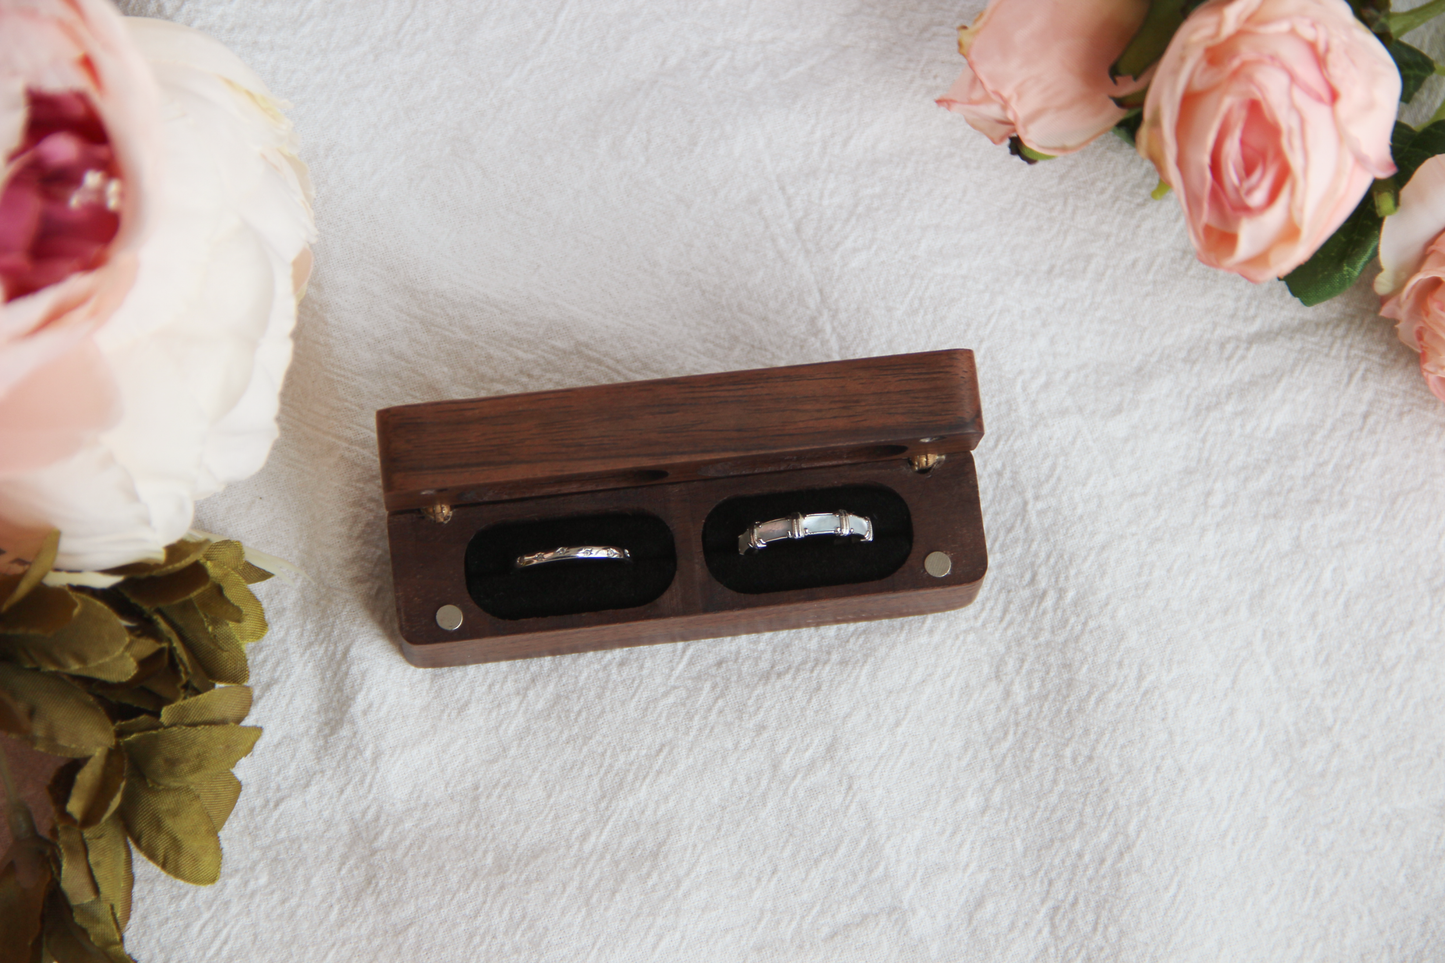 Exquisite Walnut Wedding Ring Box - Handcrafted Elegance for Your Special Day